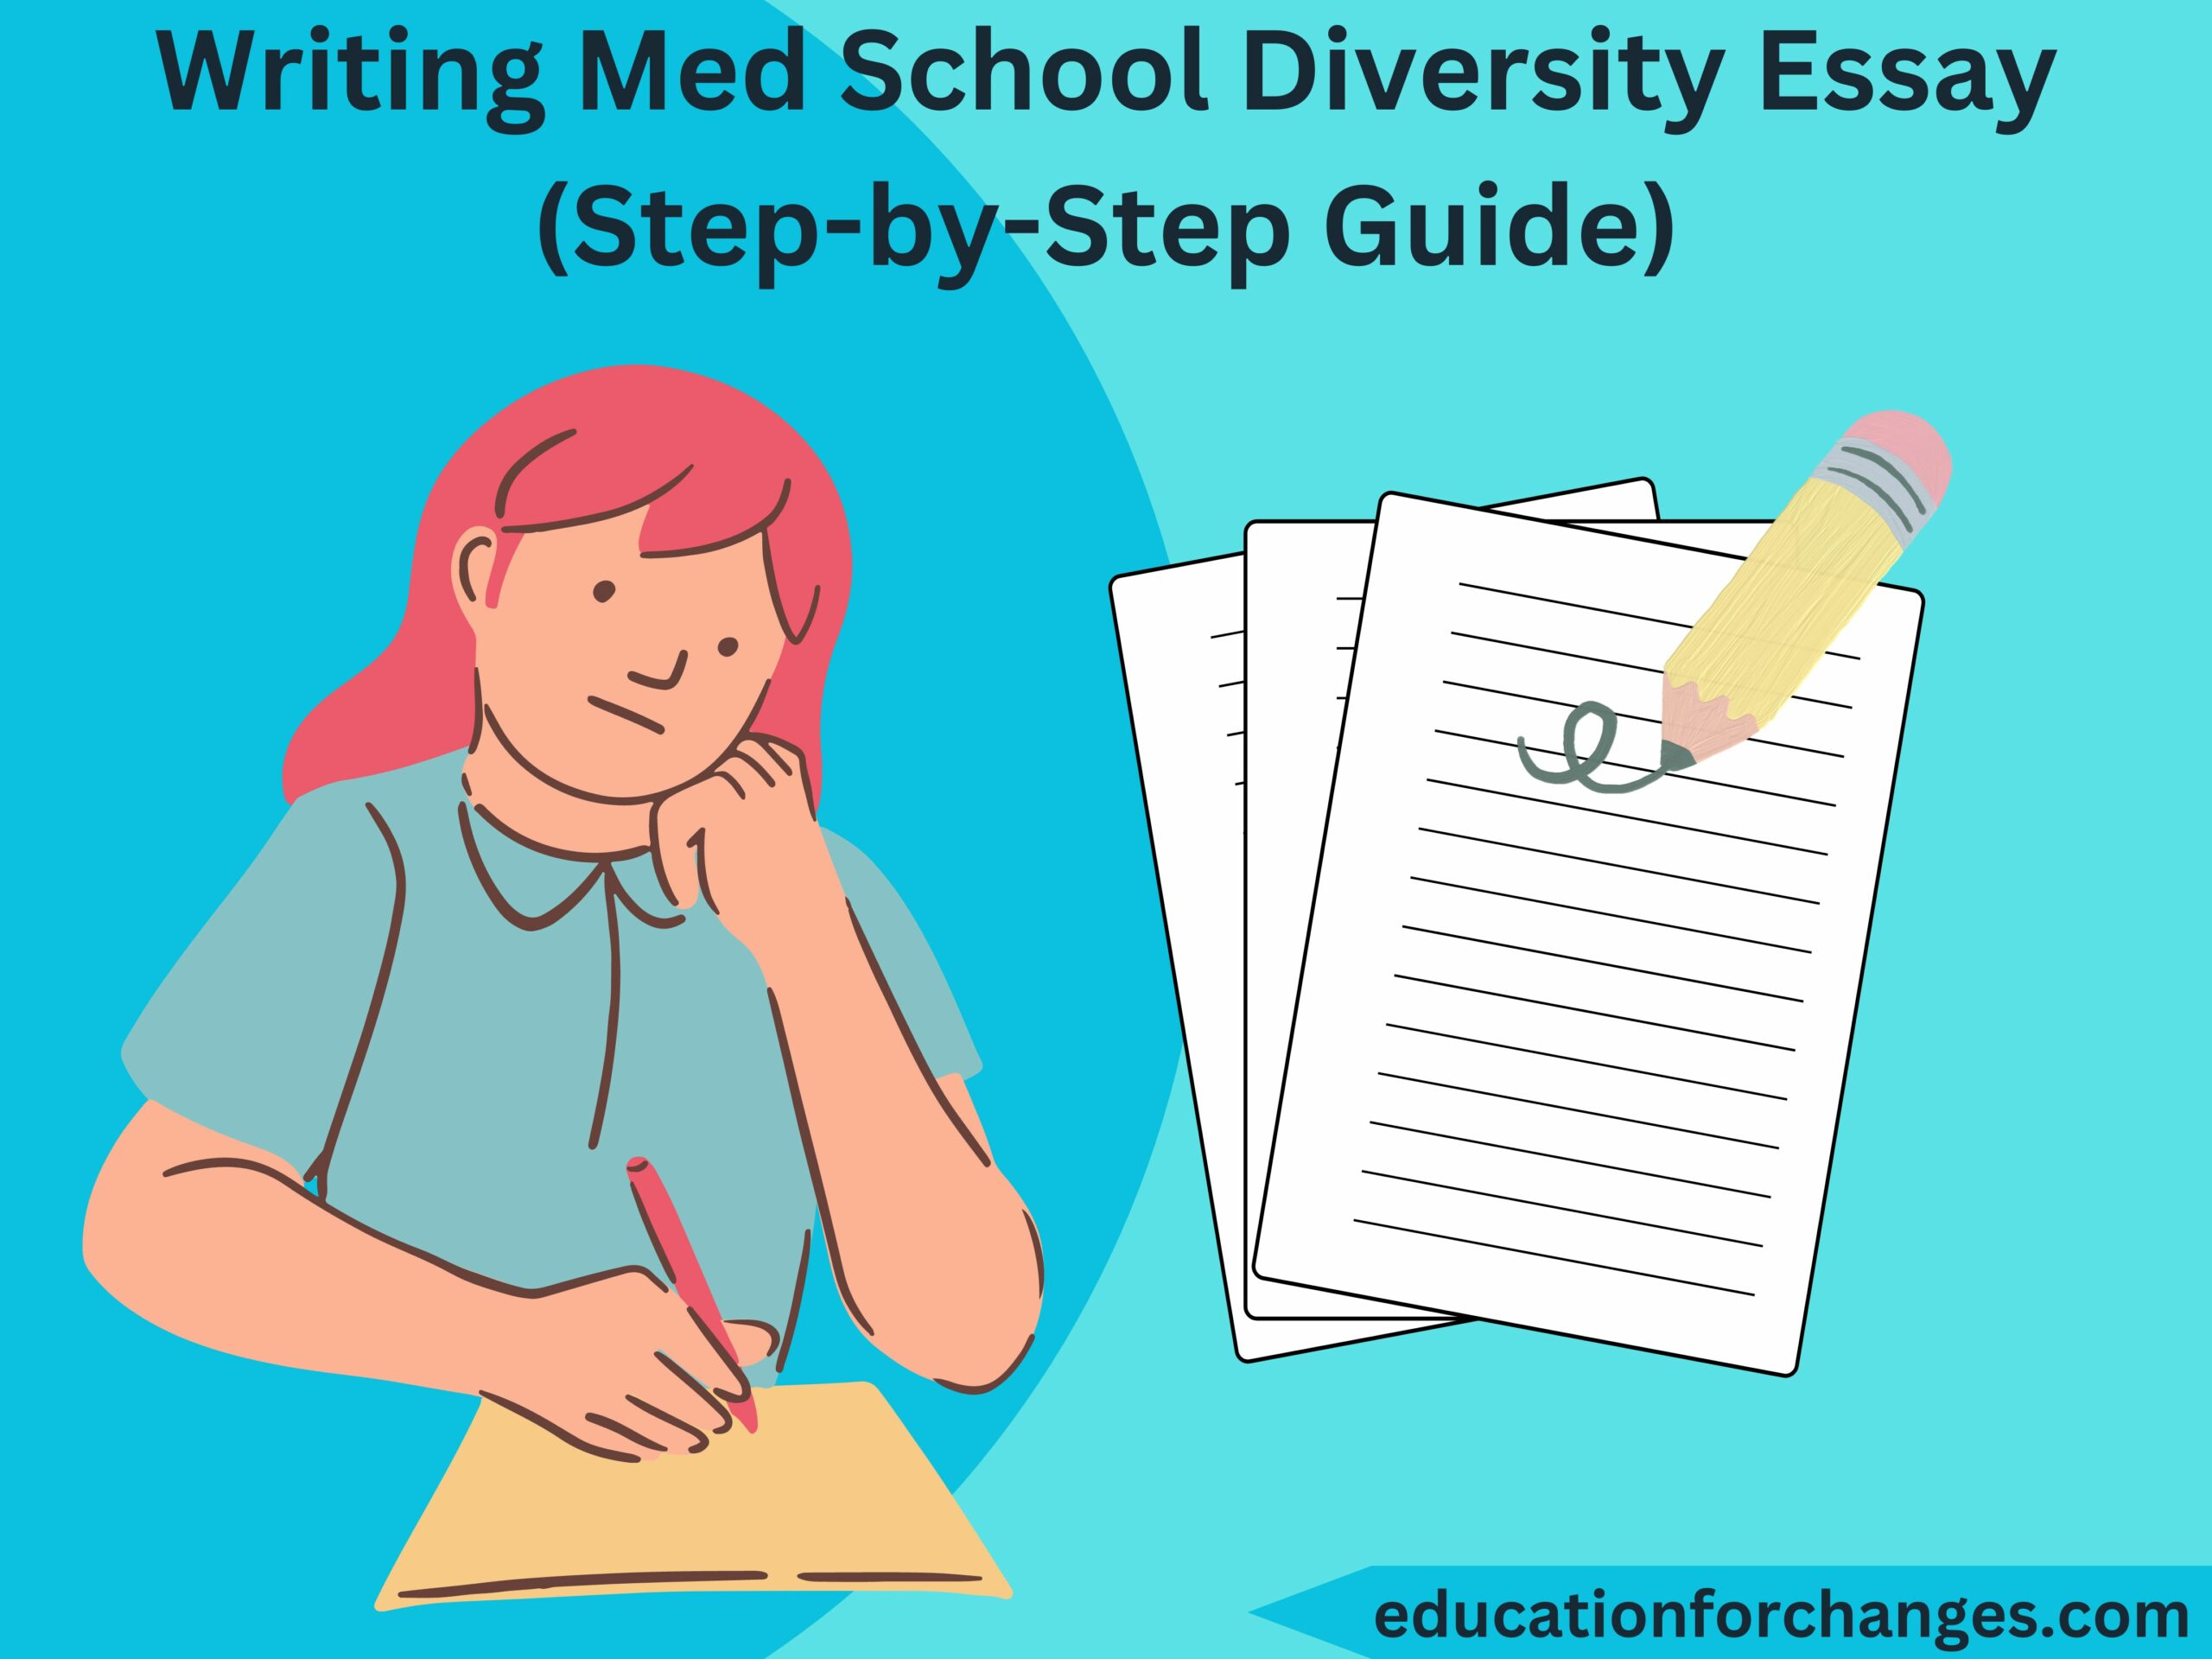 Writing Med School Diversity Essay (Step-by-Step Guide)